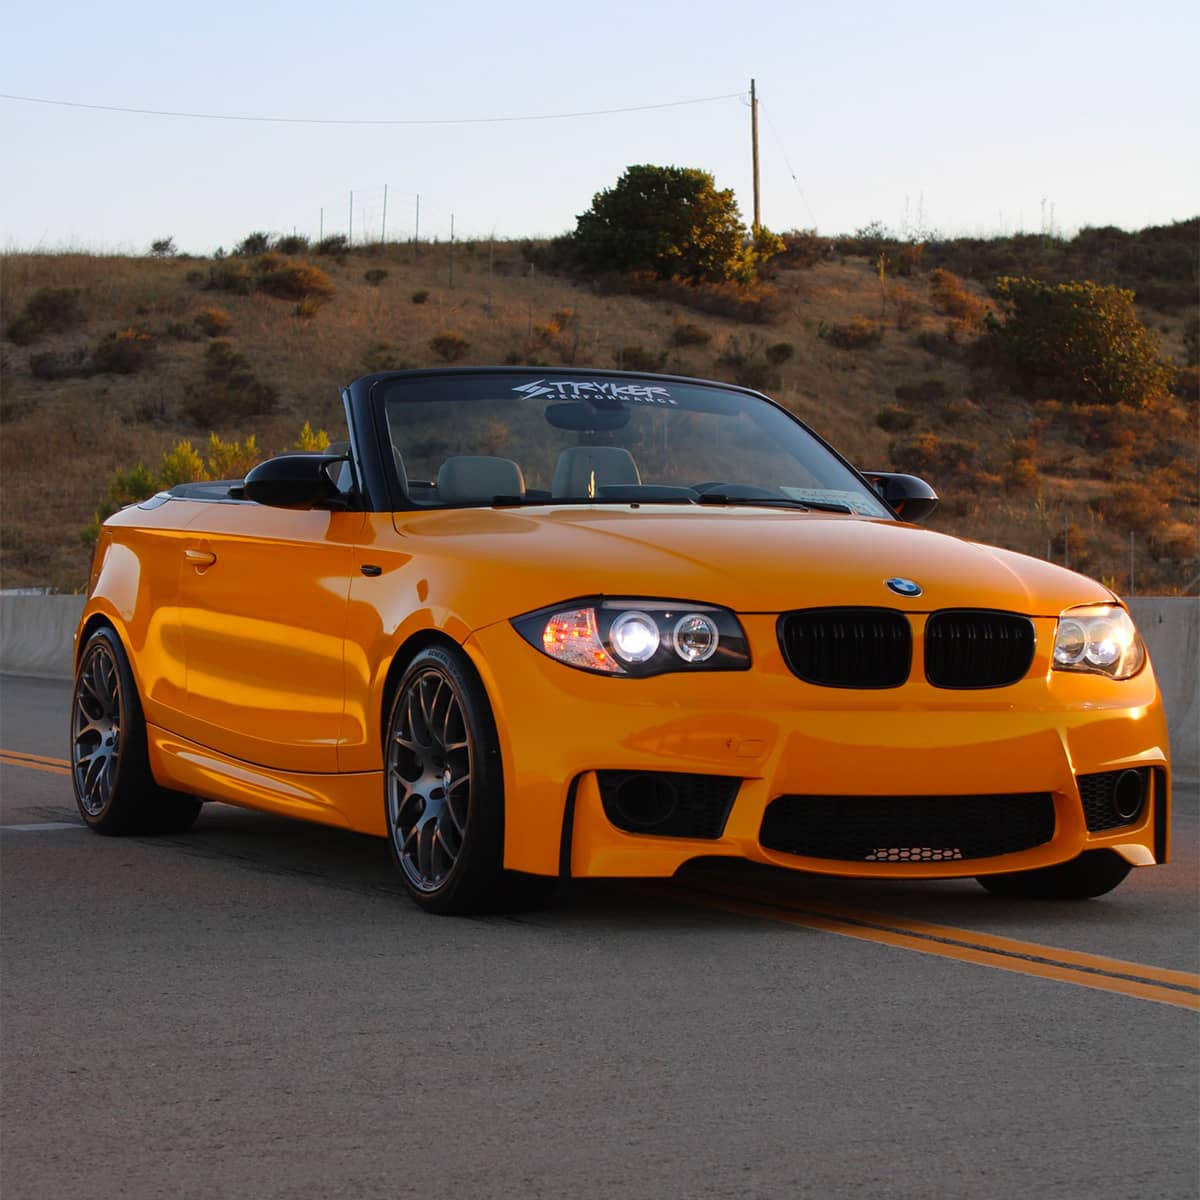 Modified BMW 135i E88 Convertible with lowered suspension